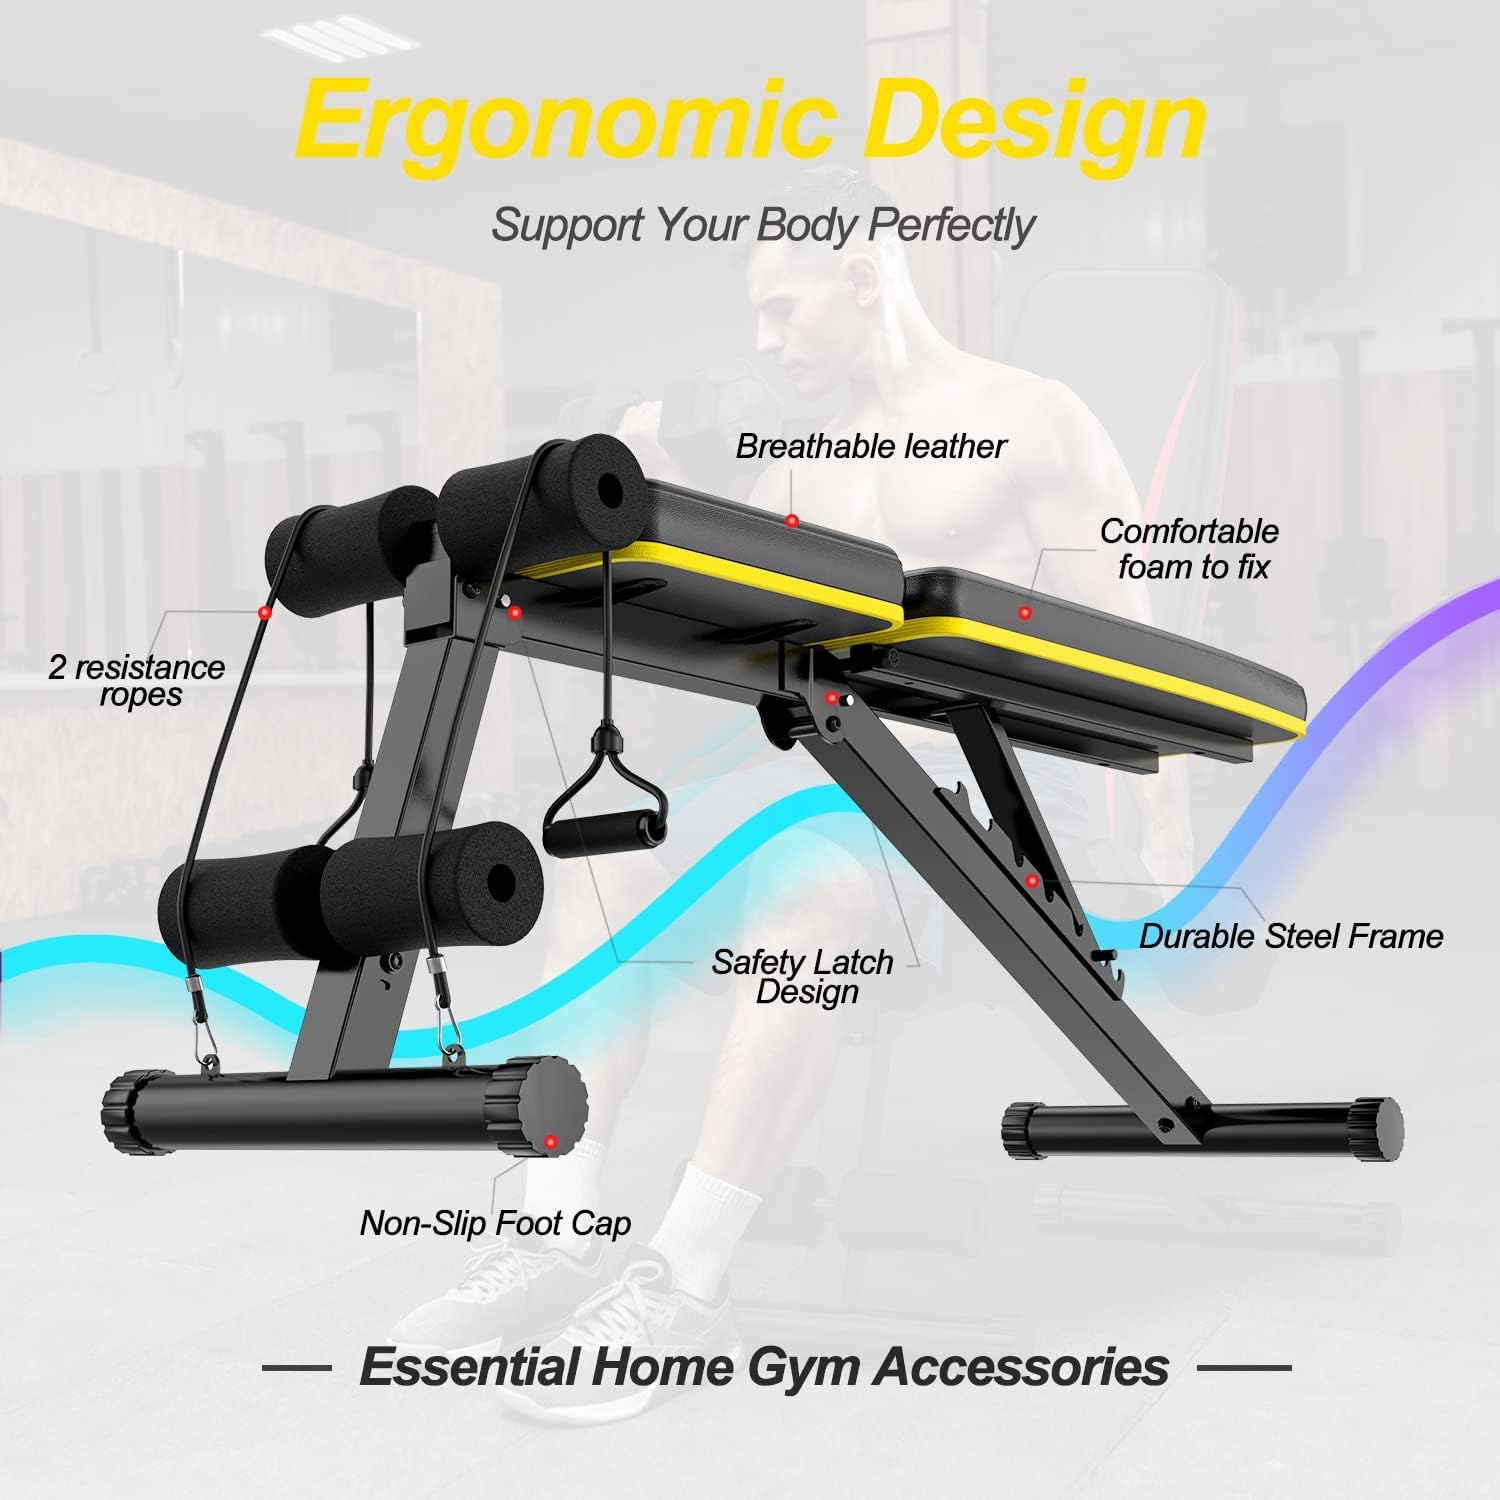 https://bigbigmart.com/wp-content/uploads/2023/09/HITOSPORT-Adjustable-Weight-Bench-for-Full-Body-Exercise-Foldable-Strength-Training-Bench-Press-with-Resistance-Bands-for-Home-Gym-Body-Workout-Newly-Upgraded-Yellow..-1.jpg